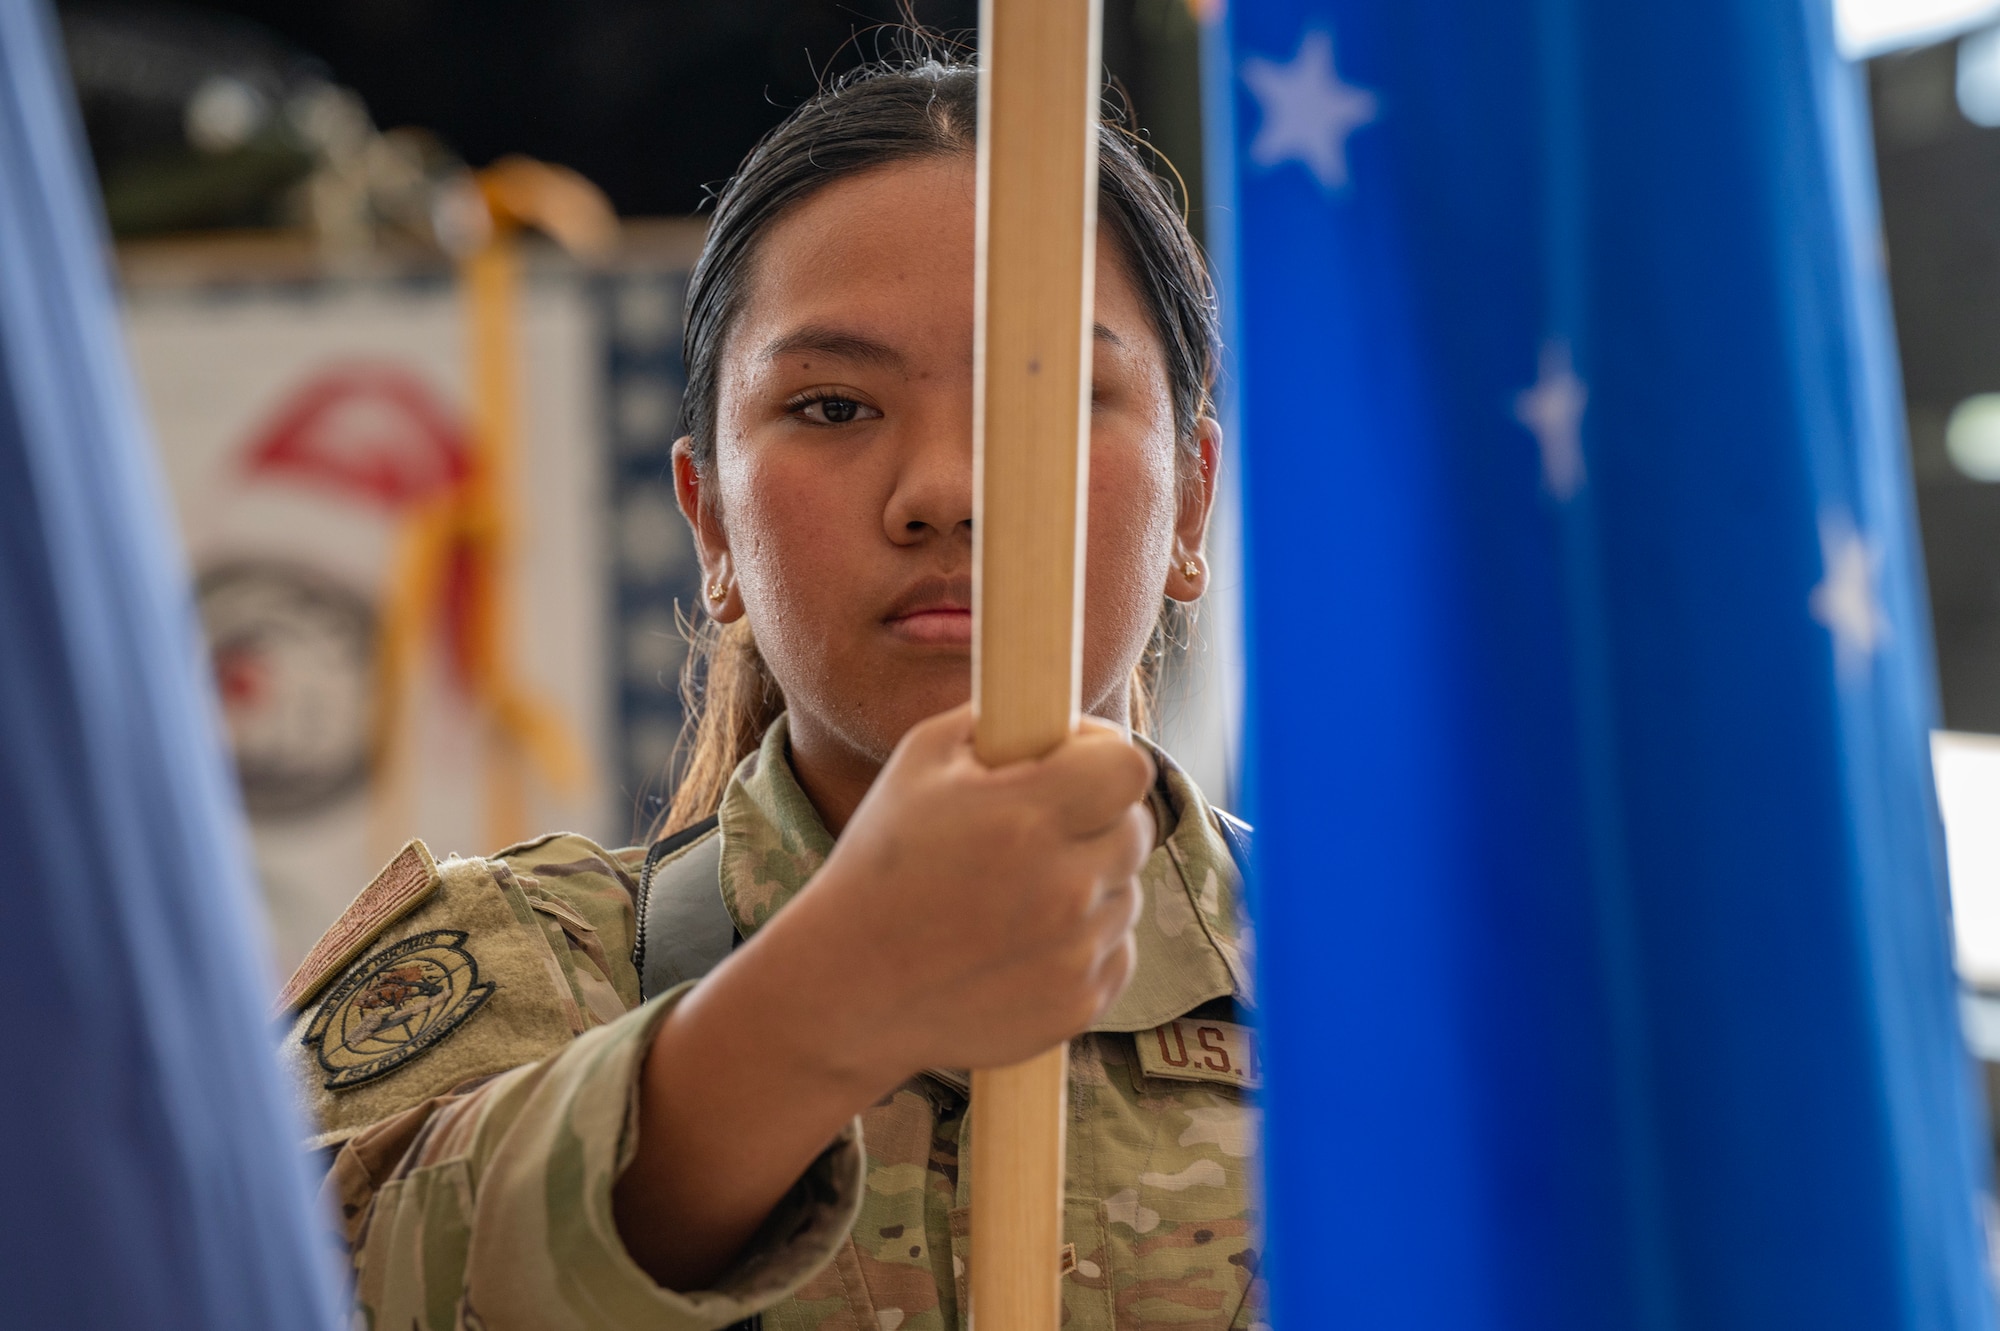 Photo of U.S. Air Force honor guardsman presenting the Air Force flag during a ceremony